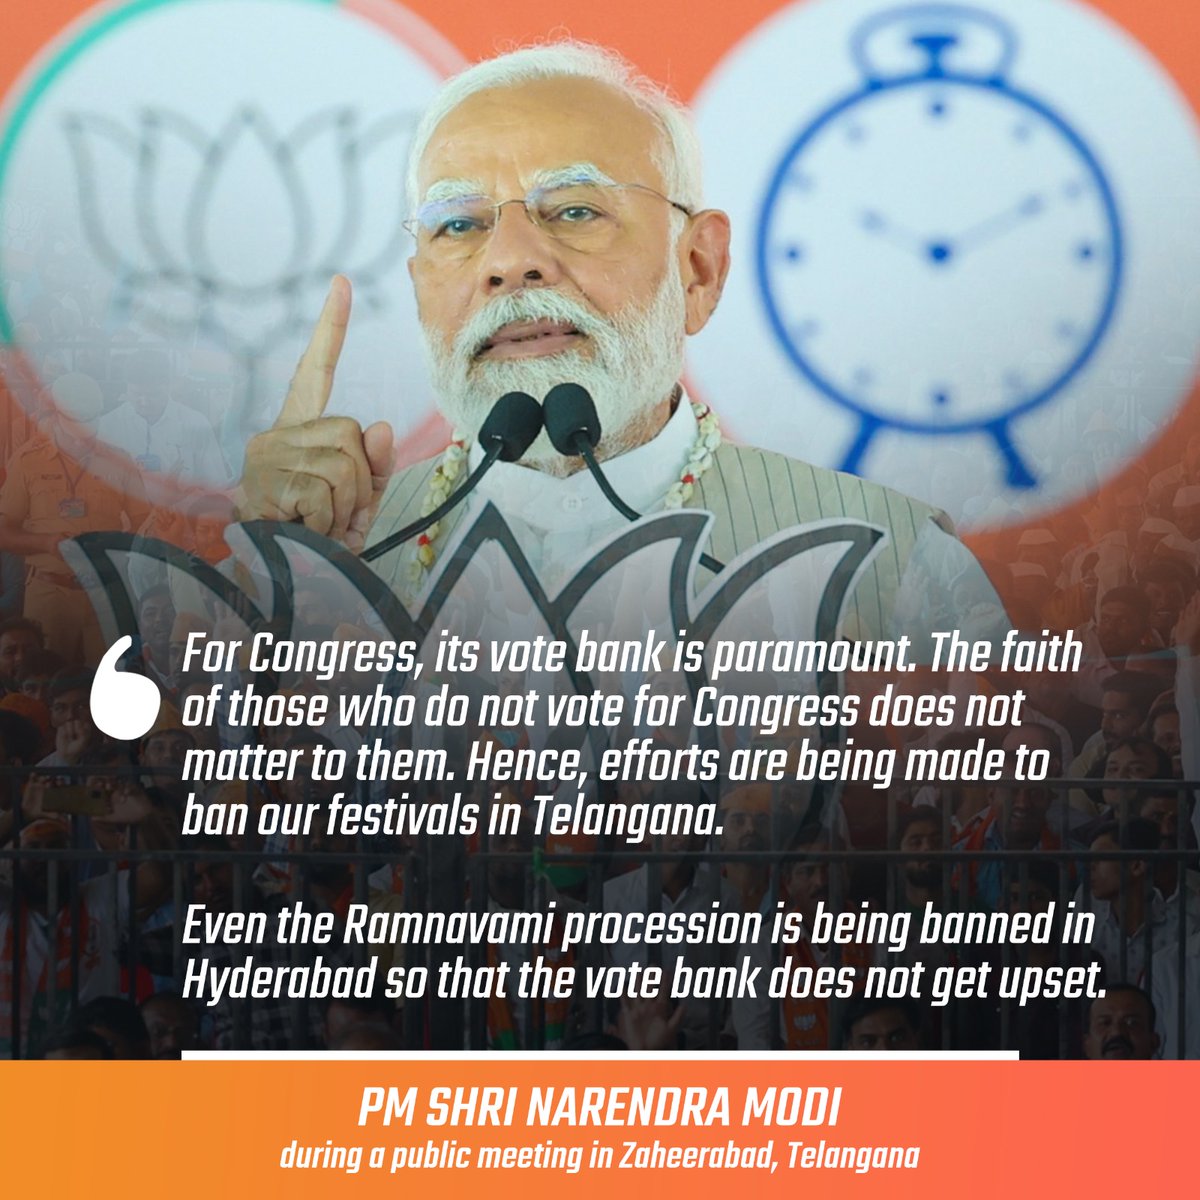 For Congress, its vote bank is paramount...

Even the Ramnavami procession is being banned in Hyderabad so that the vote bank does not get upset.

- PM @narendramodi